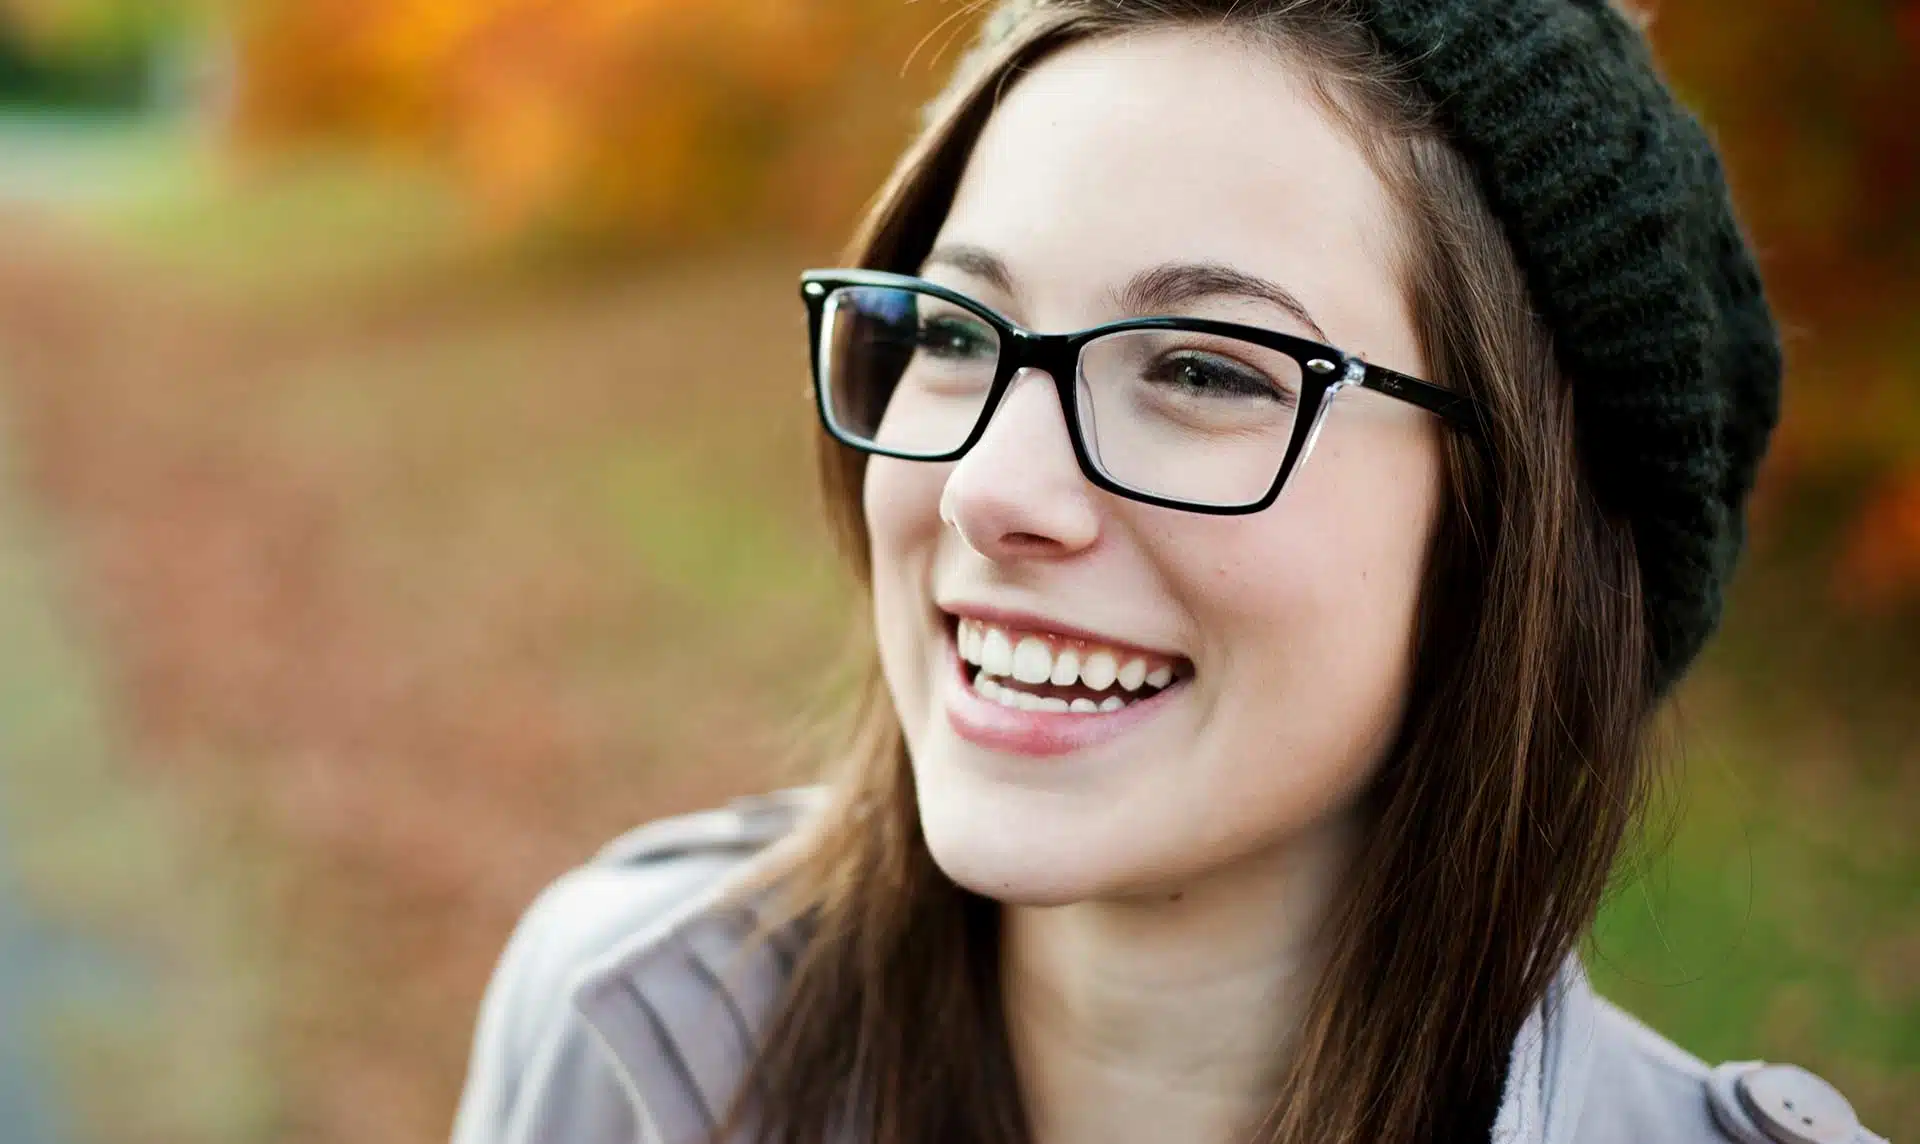 A woman wearing glasses outdoors